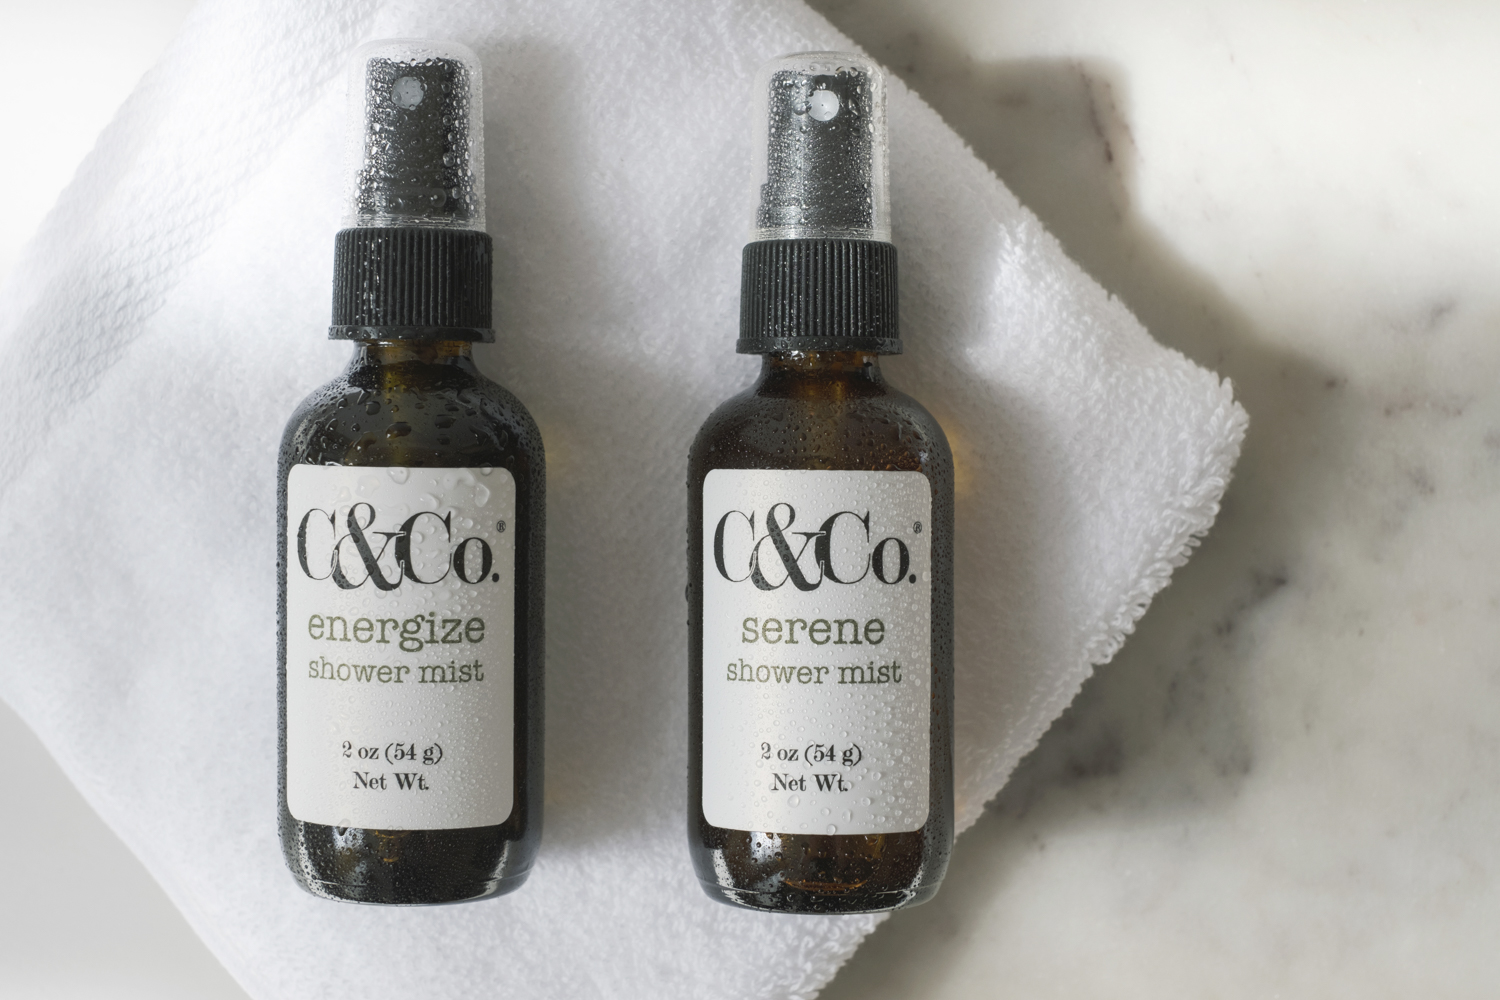 Unscented Artisan Soap – C&Co.® Handcrafted Skincare